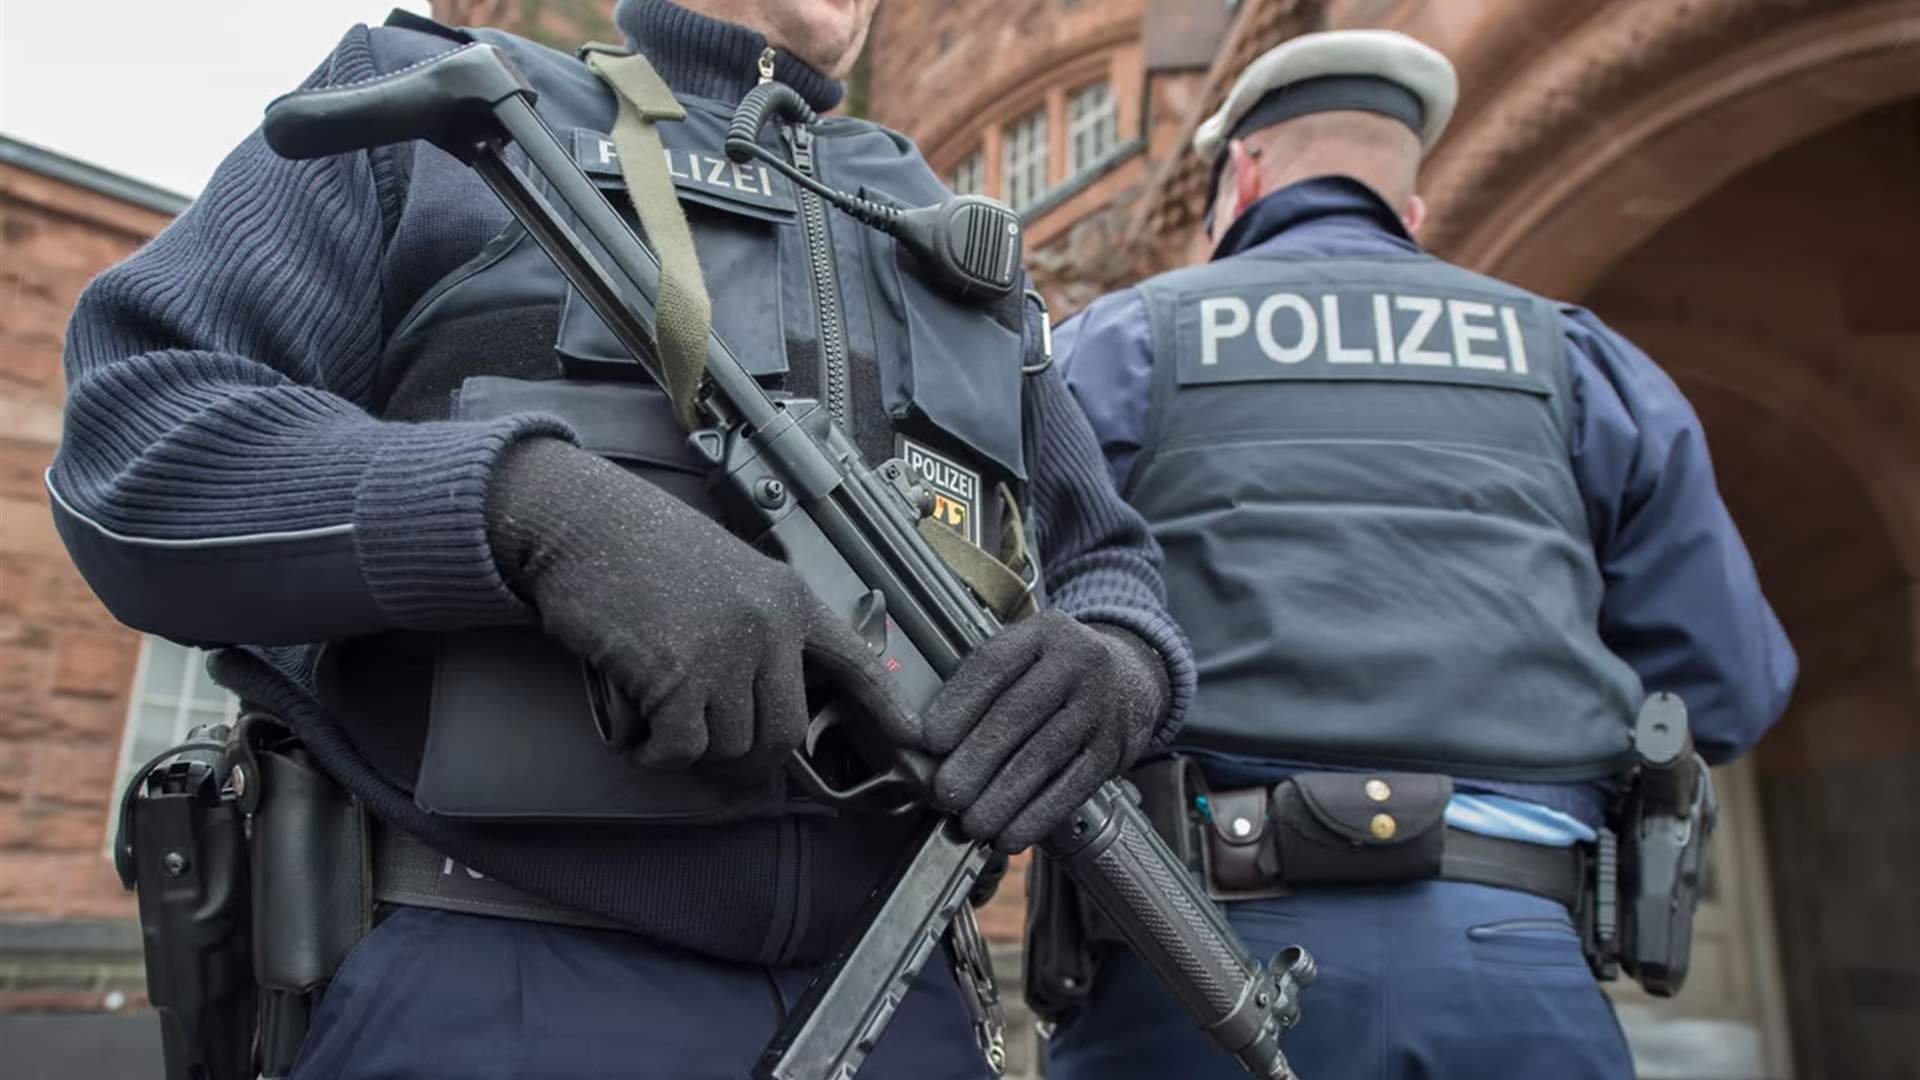 Two individuals suspected of being Russian spies arrested in Germany